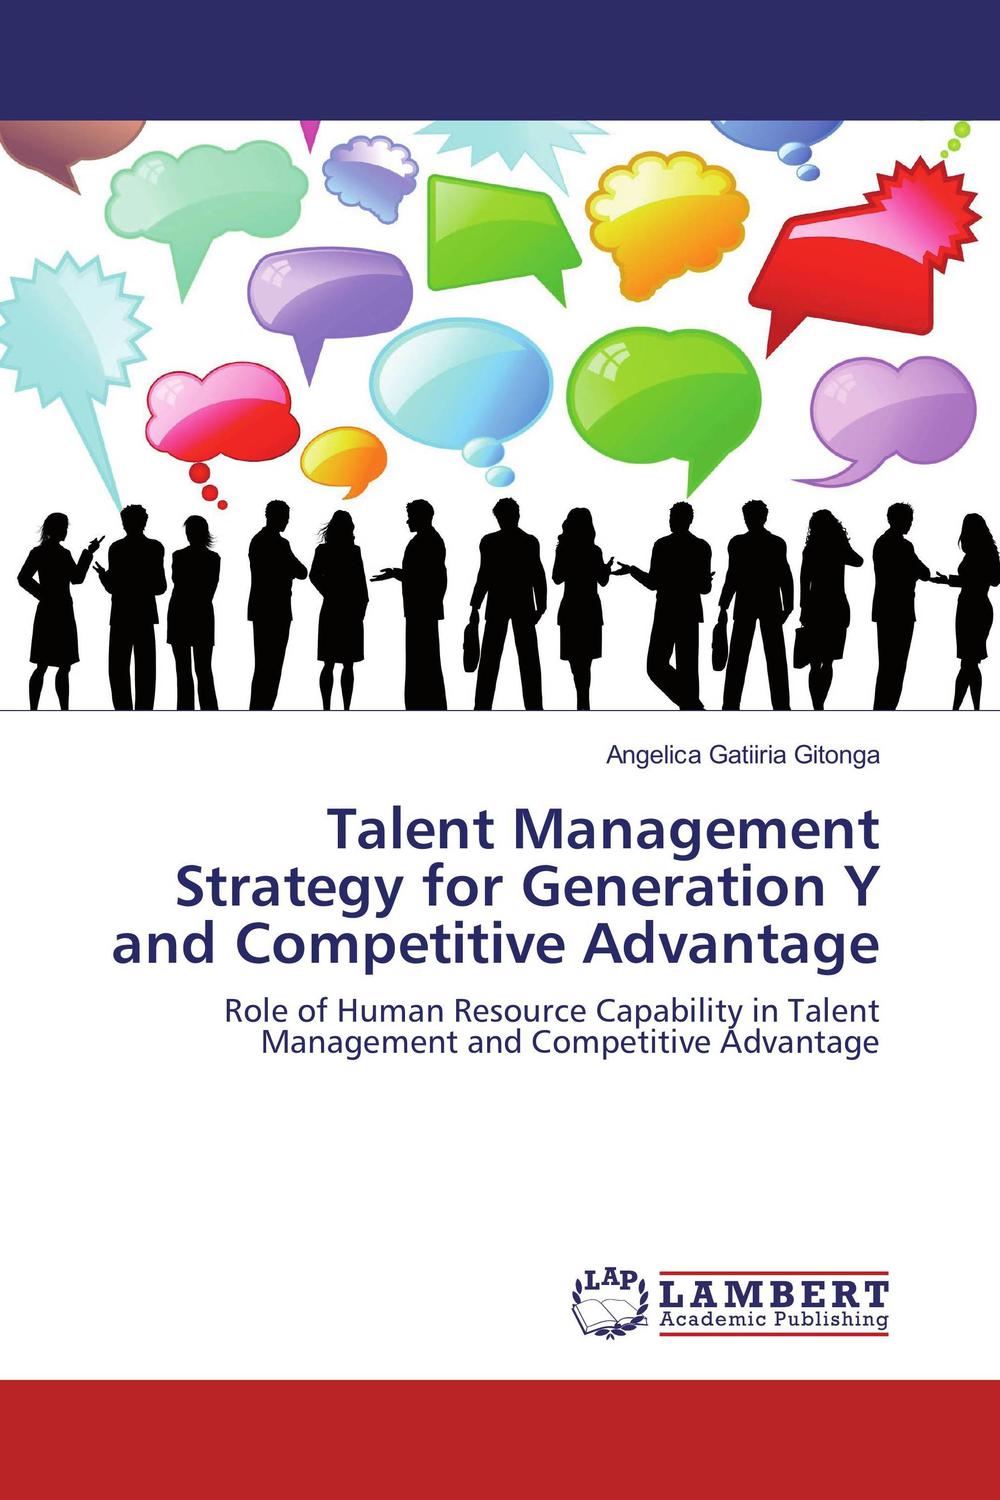 talent management strategy for generation y and competitive advantage role of human resource capability in